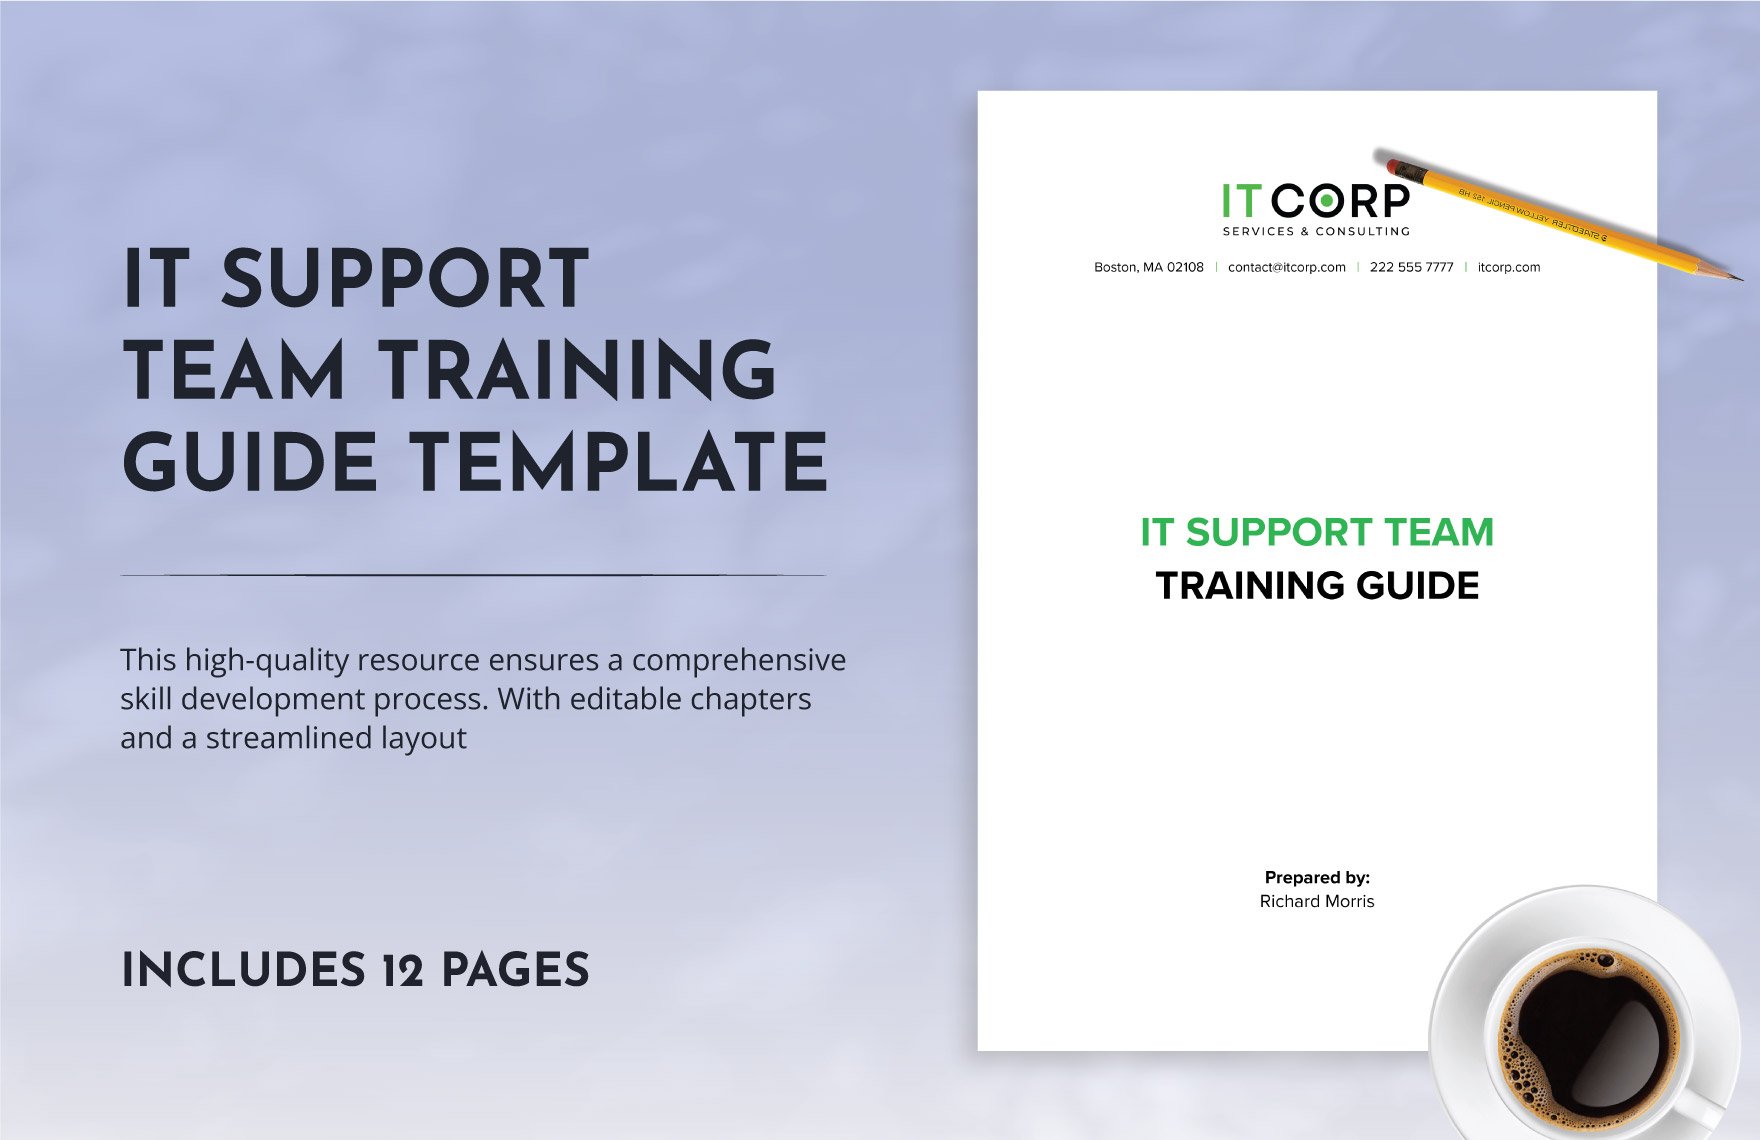 IT Support Team Training Guide Template